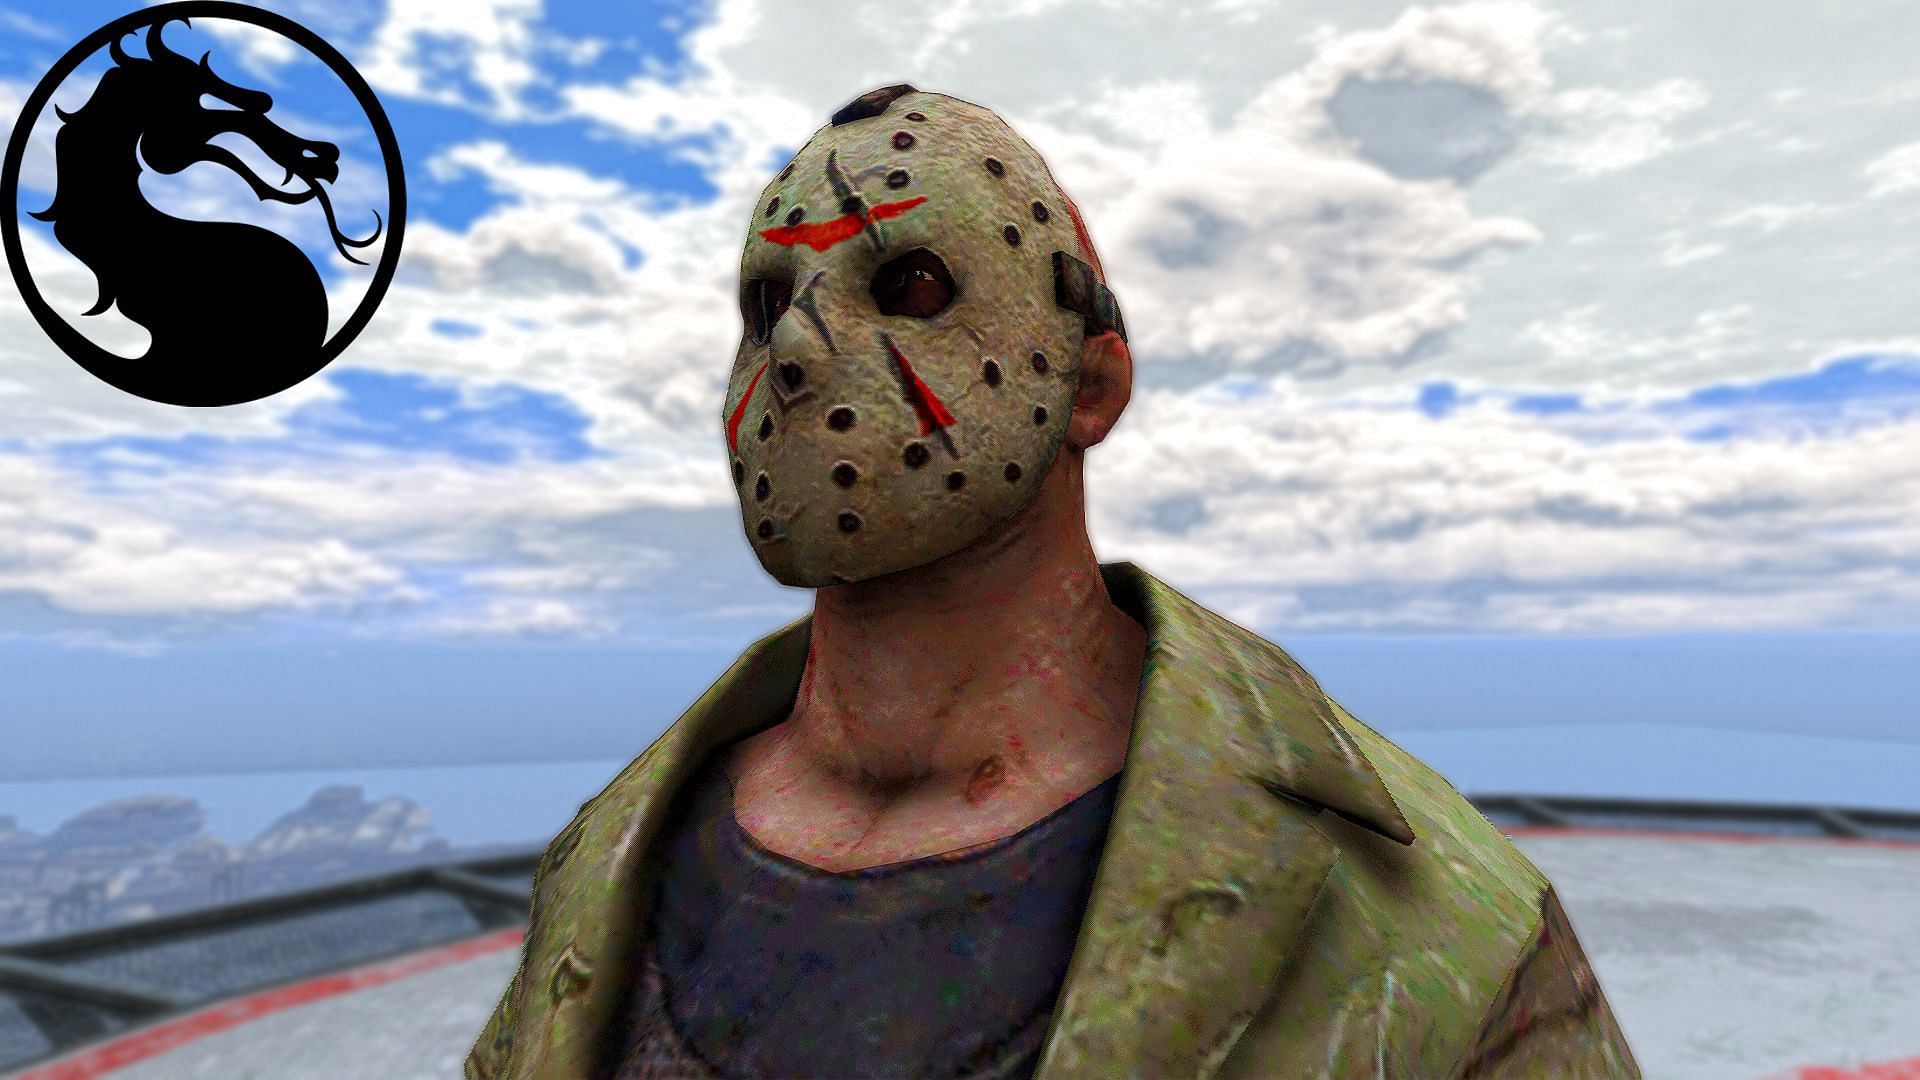 Jason Voorhees standing on top of the Maze Bank Tower (Image via gta5-mods.com)